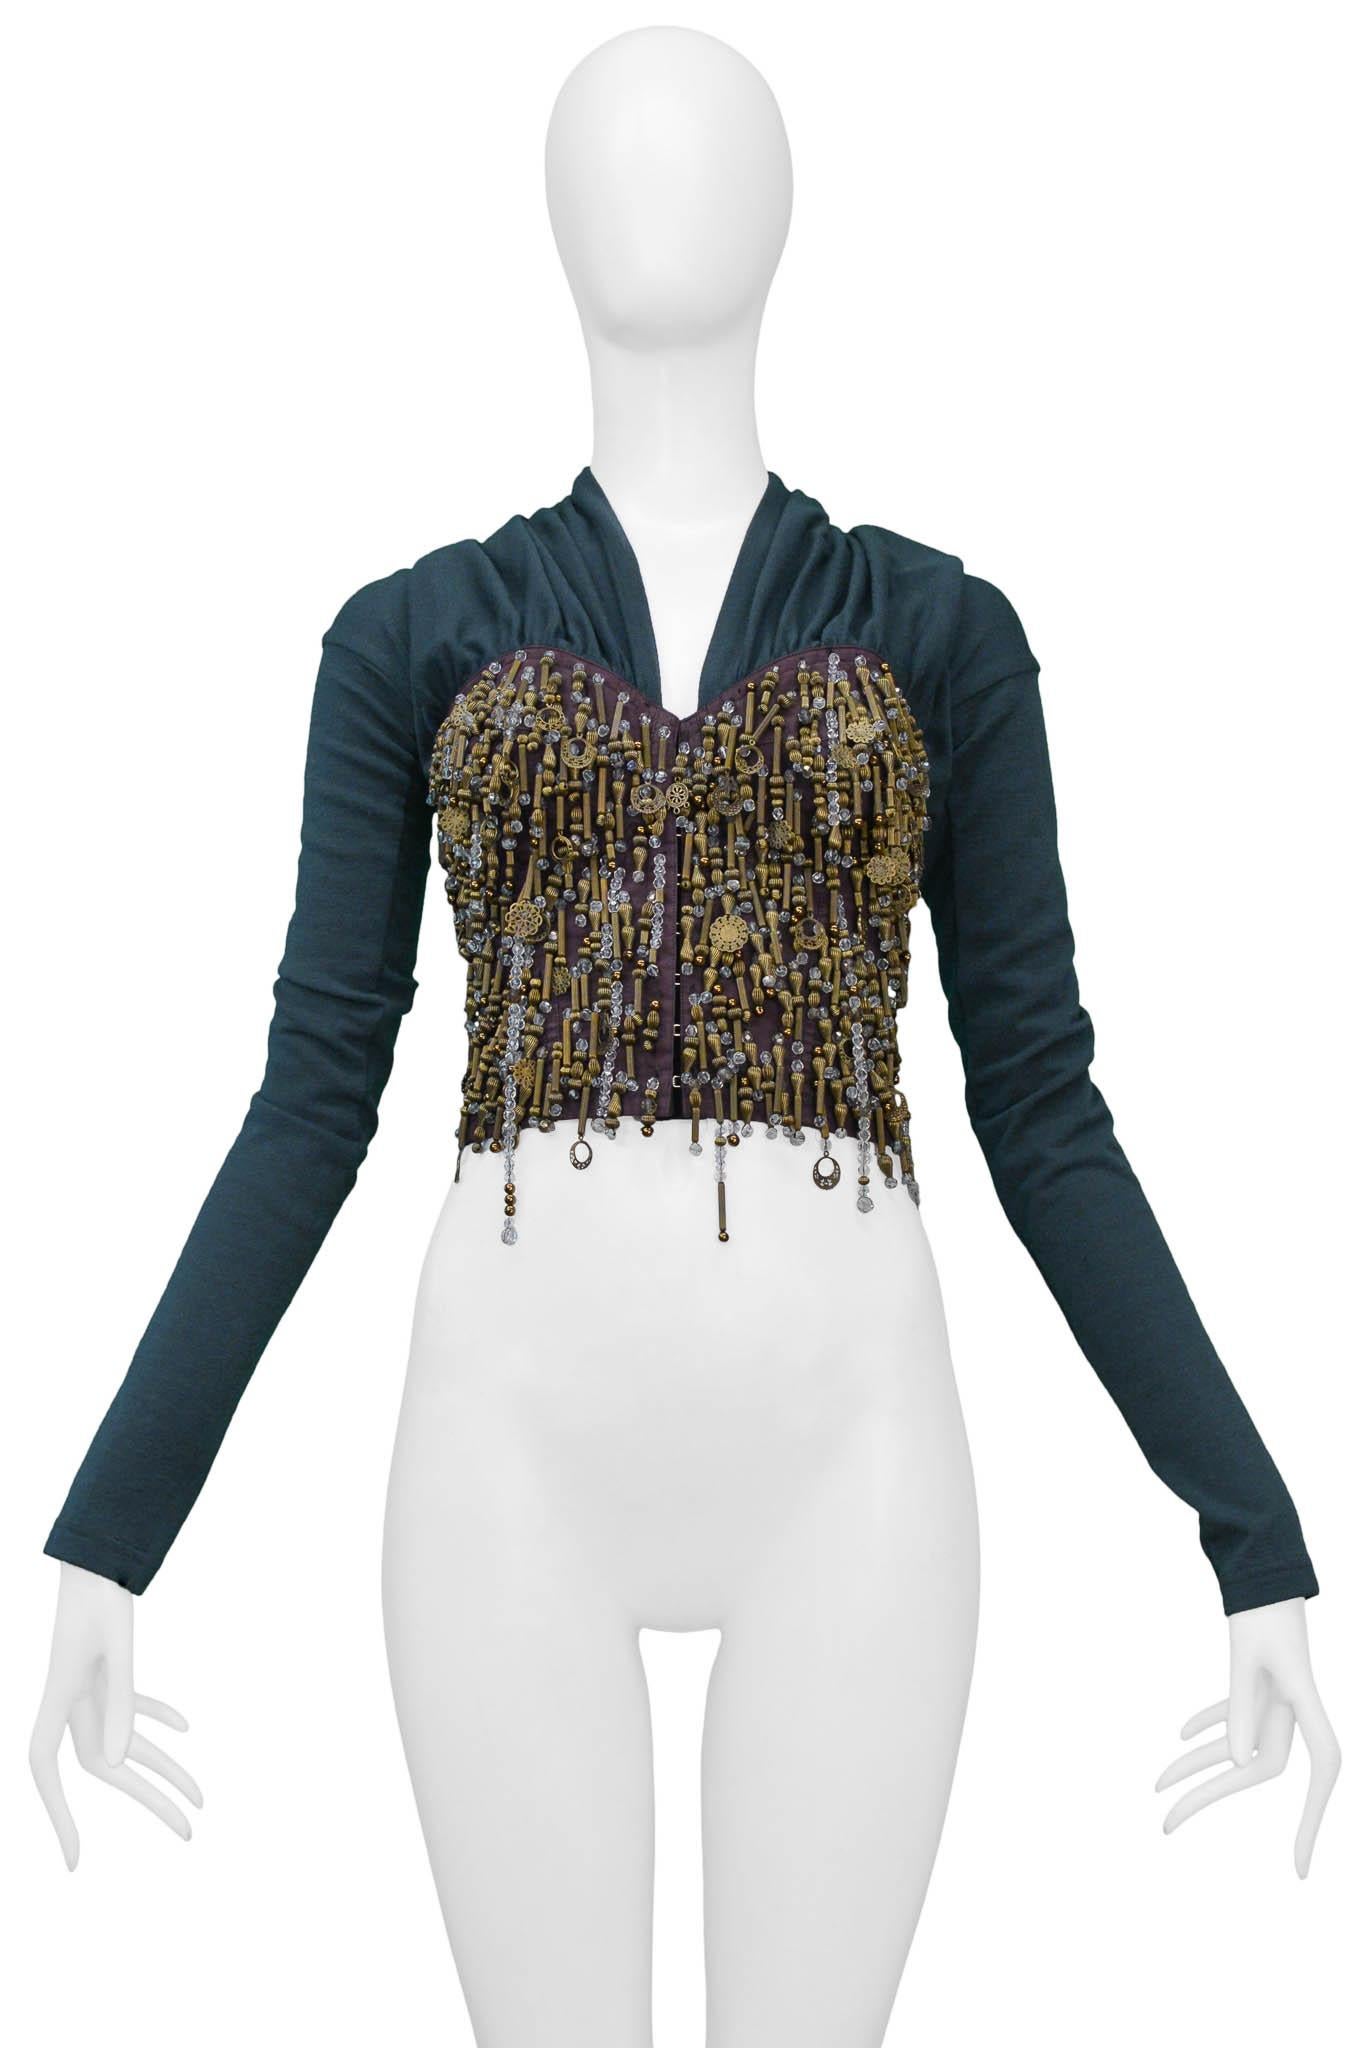 Resurrection Vintage is excited to offer a vintage Dolce & Gabbana grey-green beaded jacket featuring a front hook and eye closure, a gathered collar, and a brown bustier connected to the top covered in beads consisting of metal and crystal beads. 